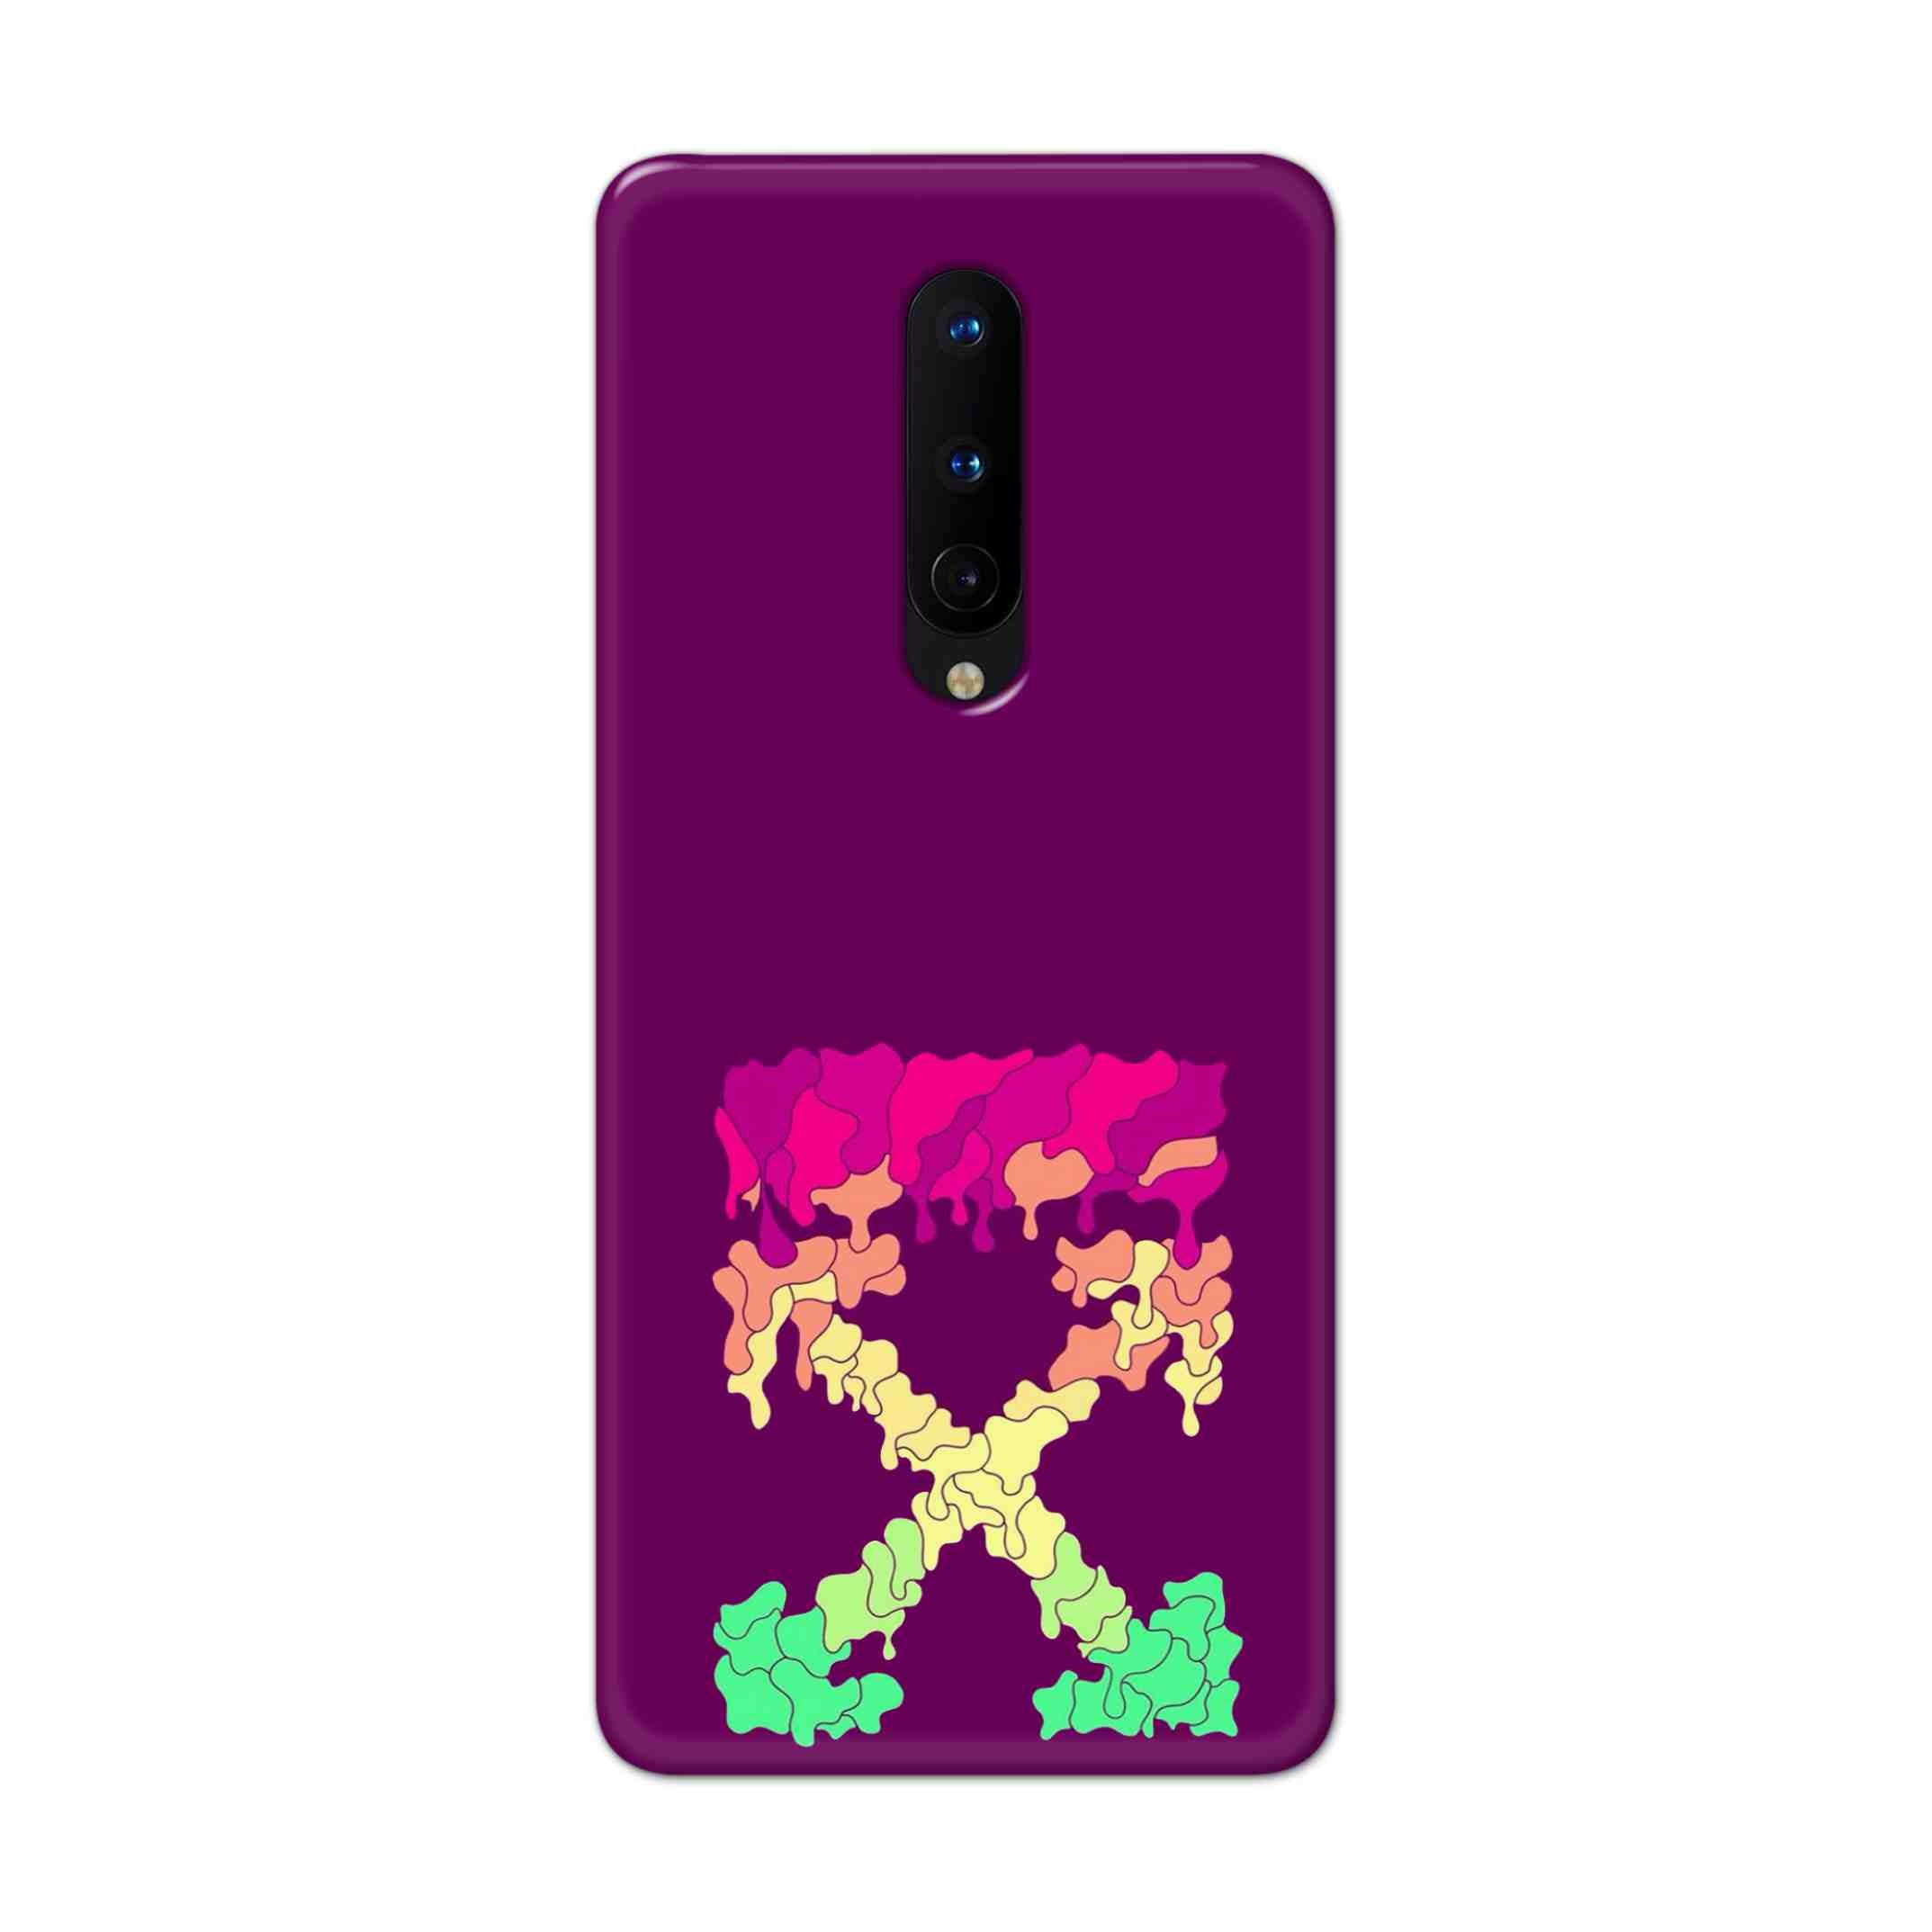 Buy X.O Hard Back Mobile Phone Case Cover For OnePlus 8 Online